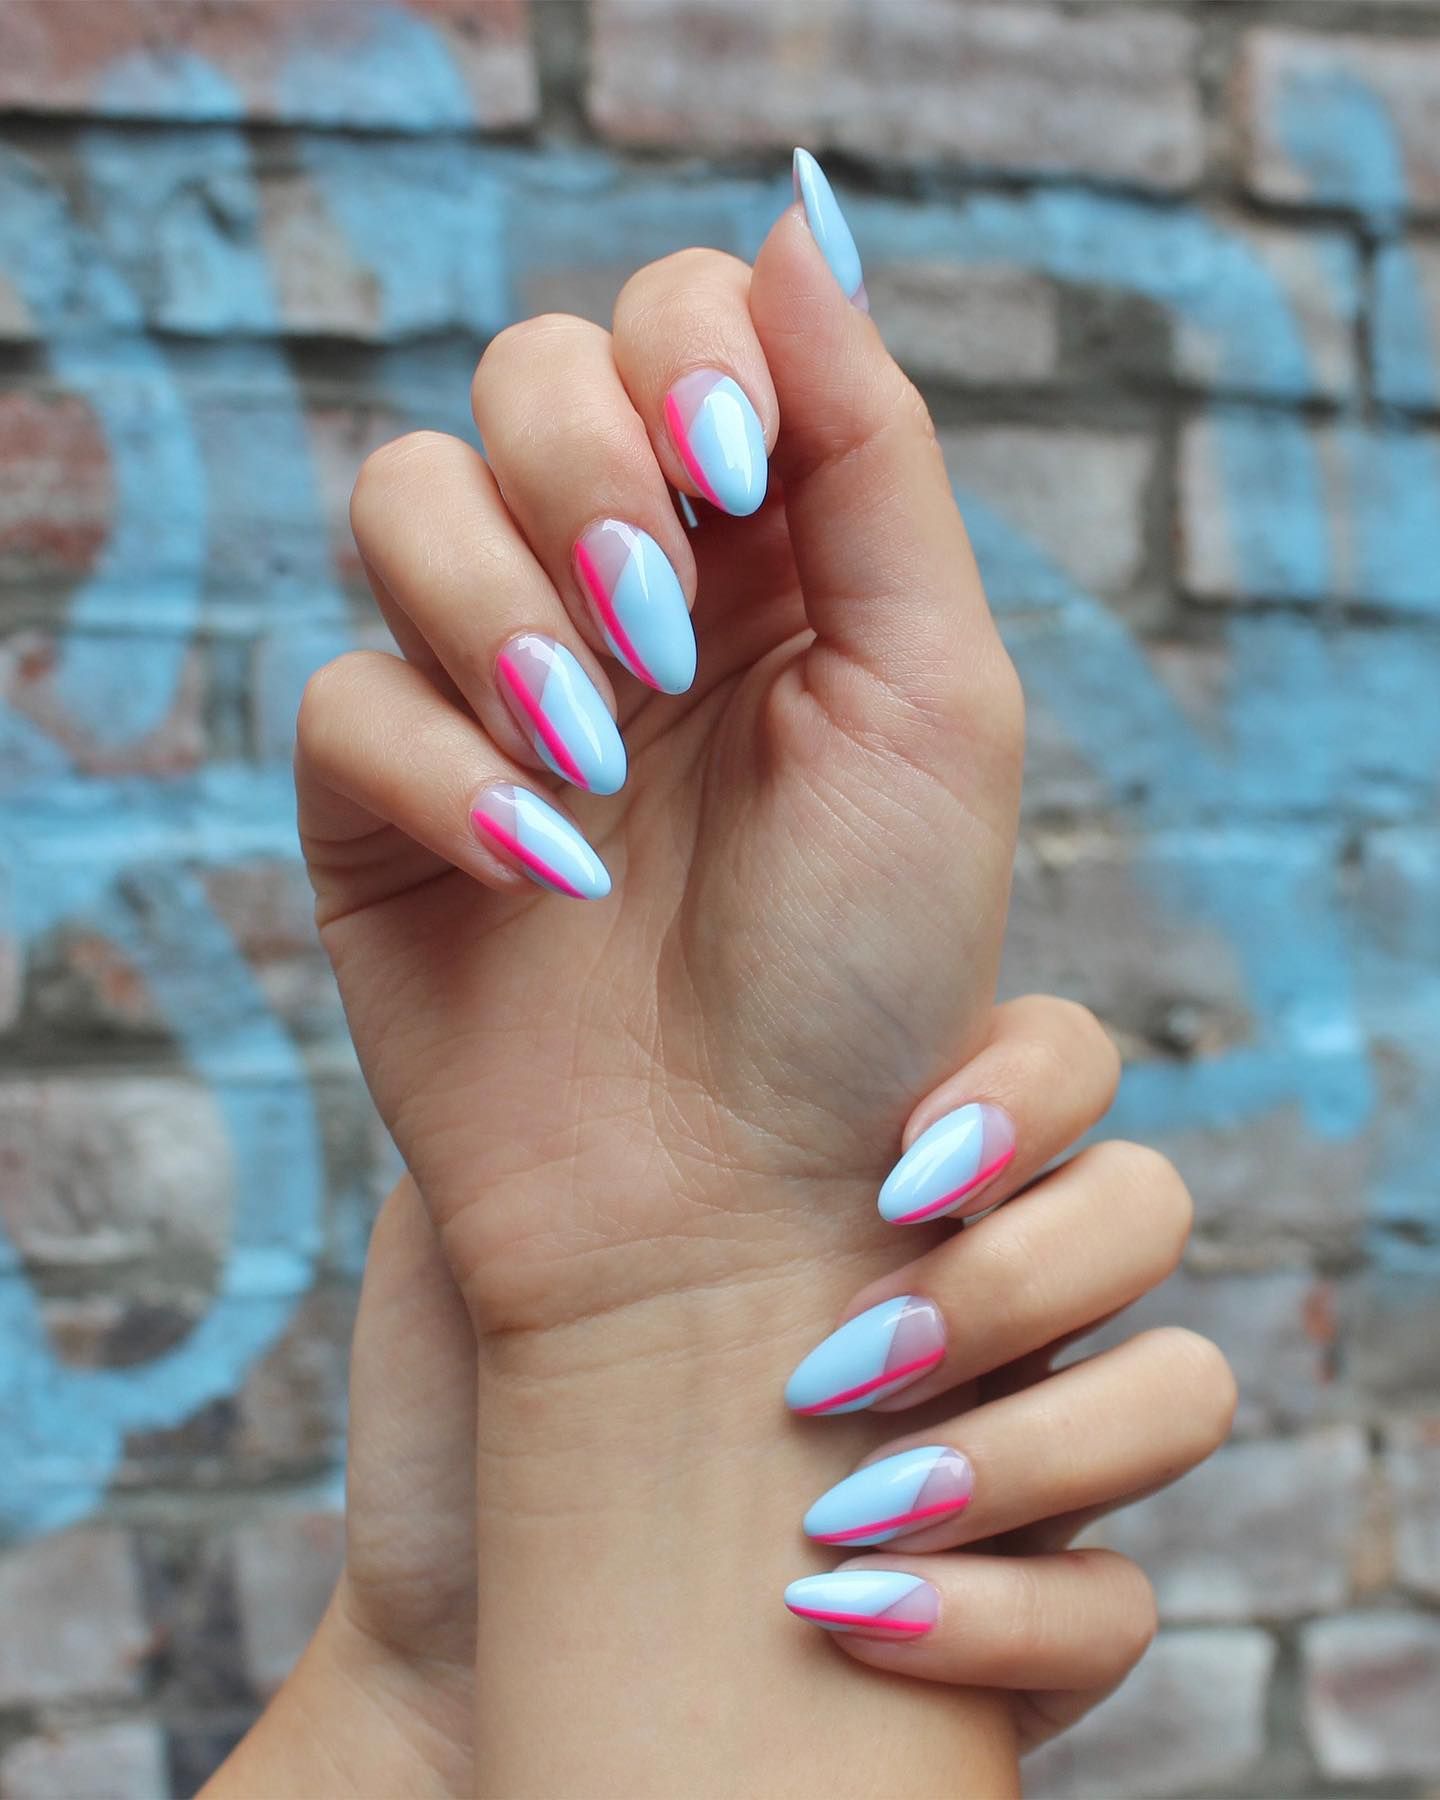 Trendy and popular: summer nail colors - Nails By Moniss